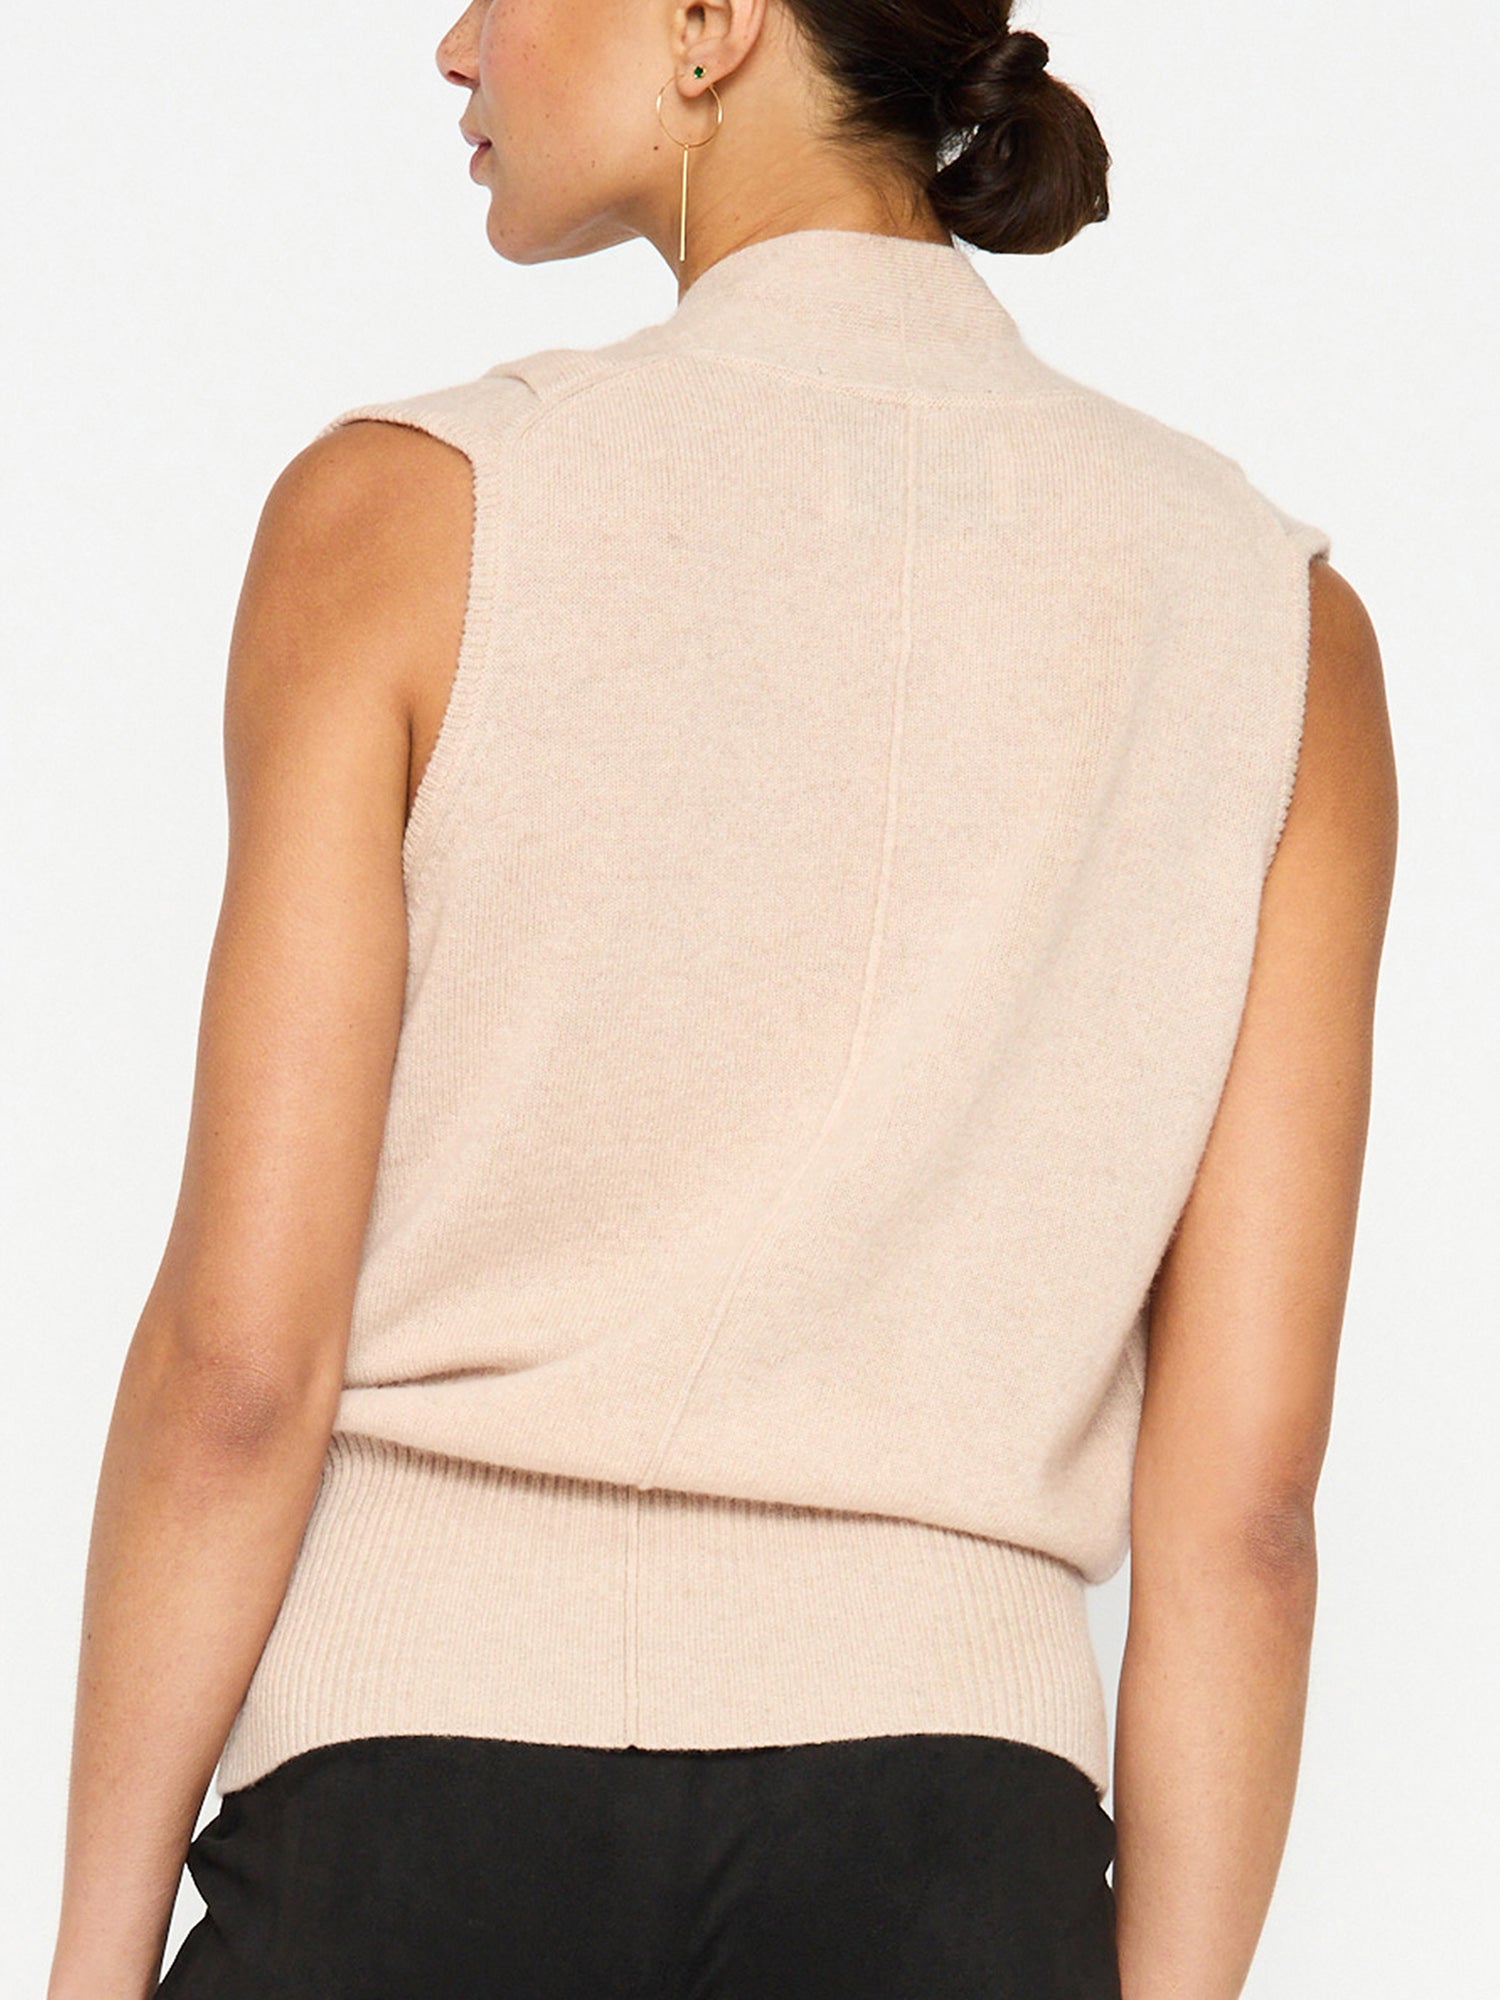 Phinneas cashmere v-neck sleeveless wrap sweater back view